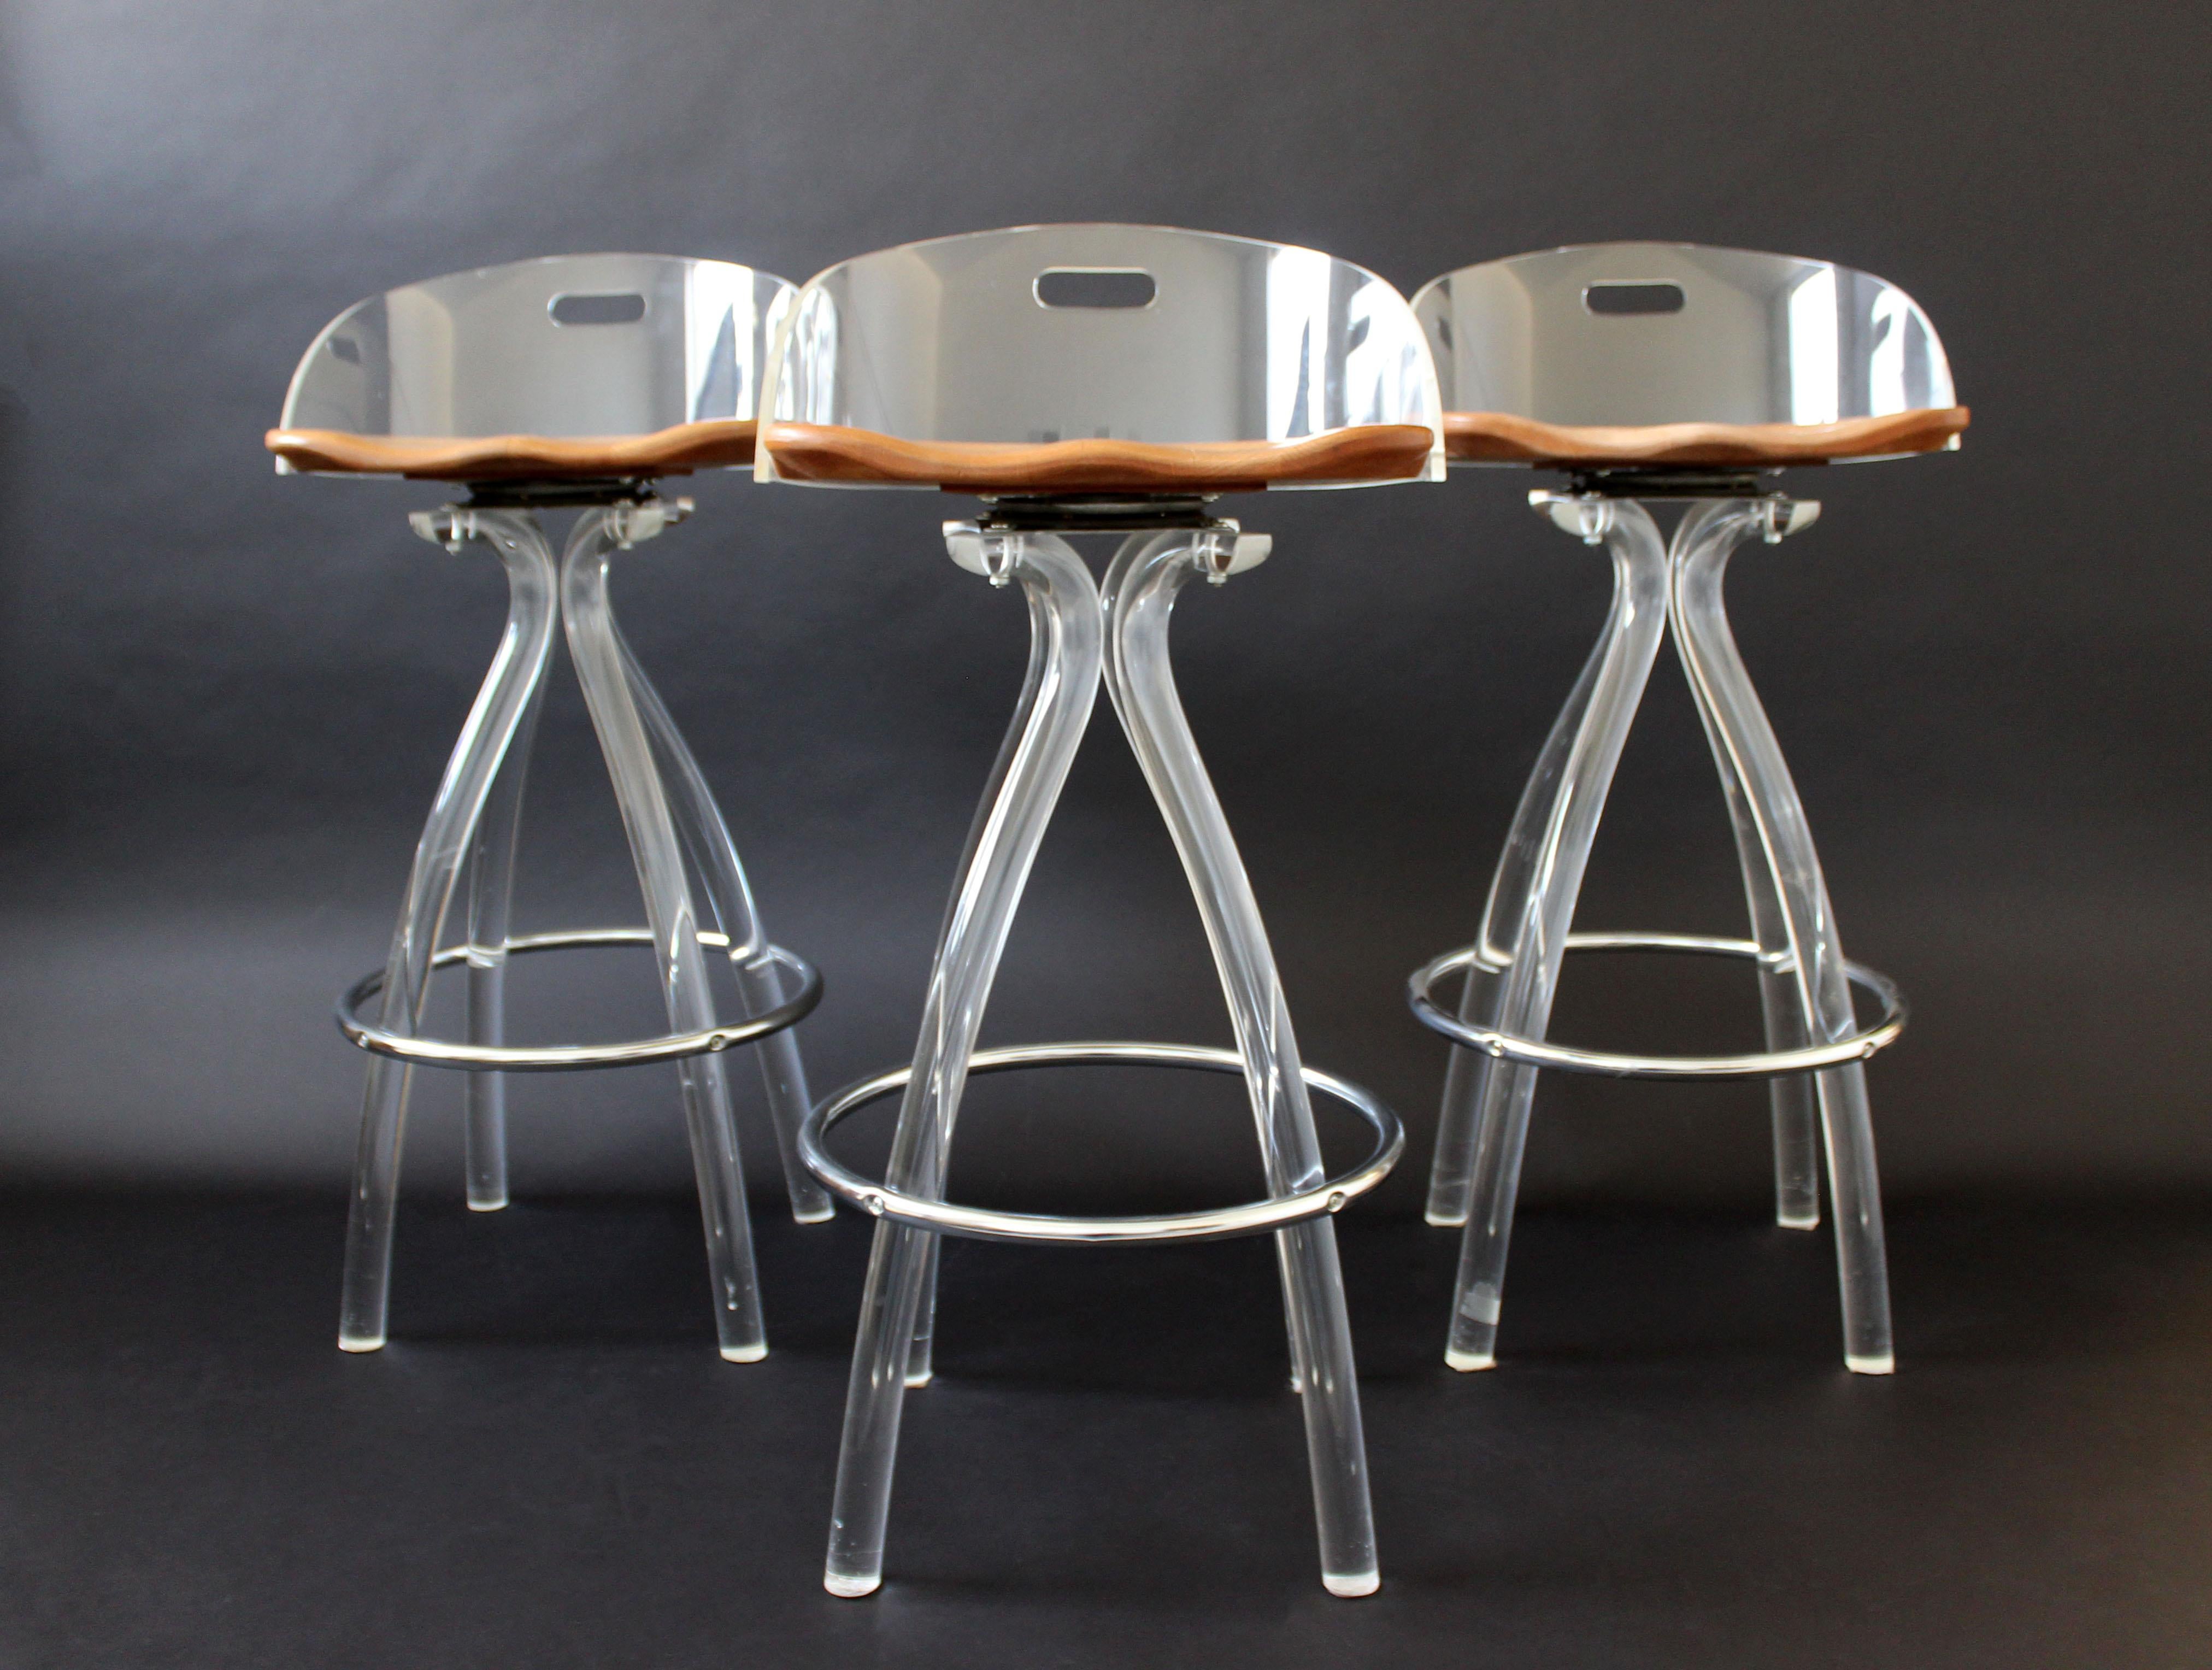 For your consideration is a spectacular set of three bar or counter stools, made of clear Lucite, with wooden saddle seats and steel footrests, by Hill manufacturing, circa 1970s. In very good condition. The dimensions of each are 17.5